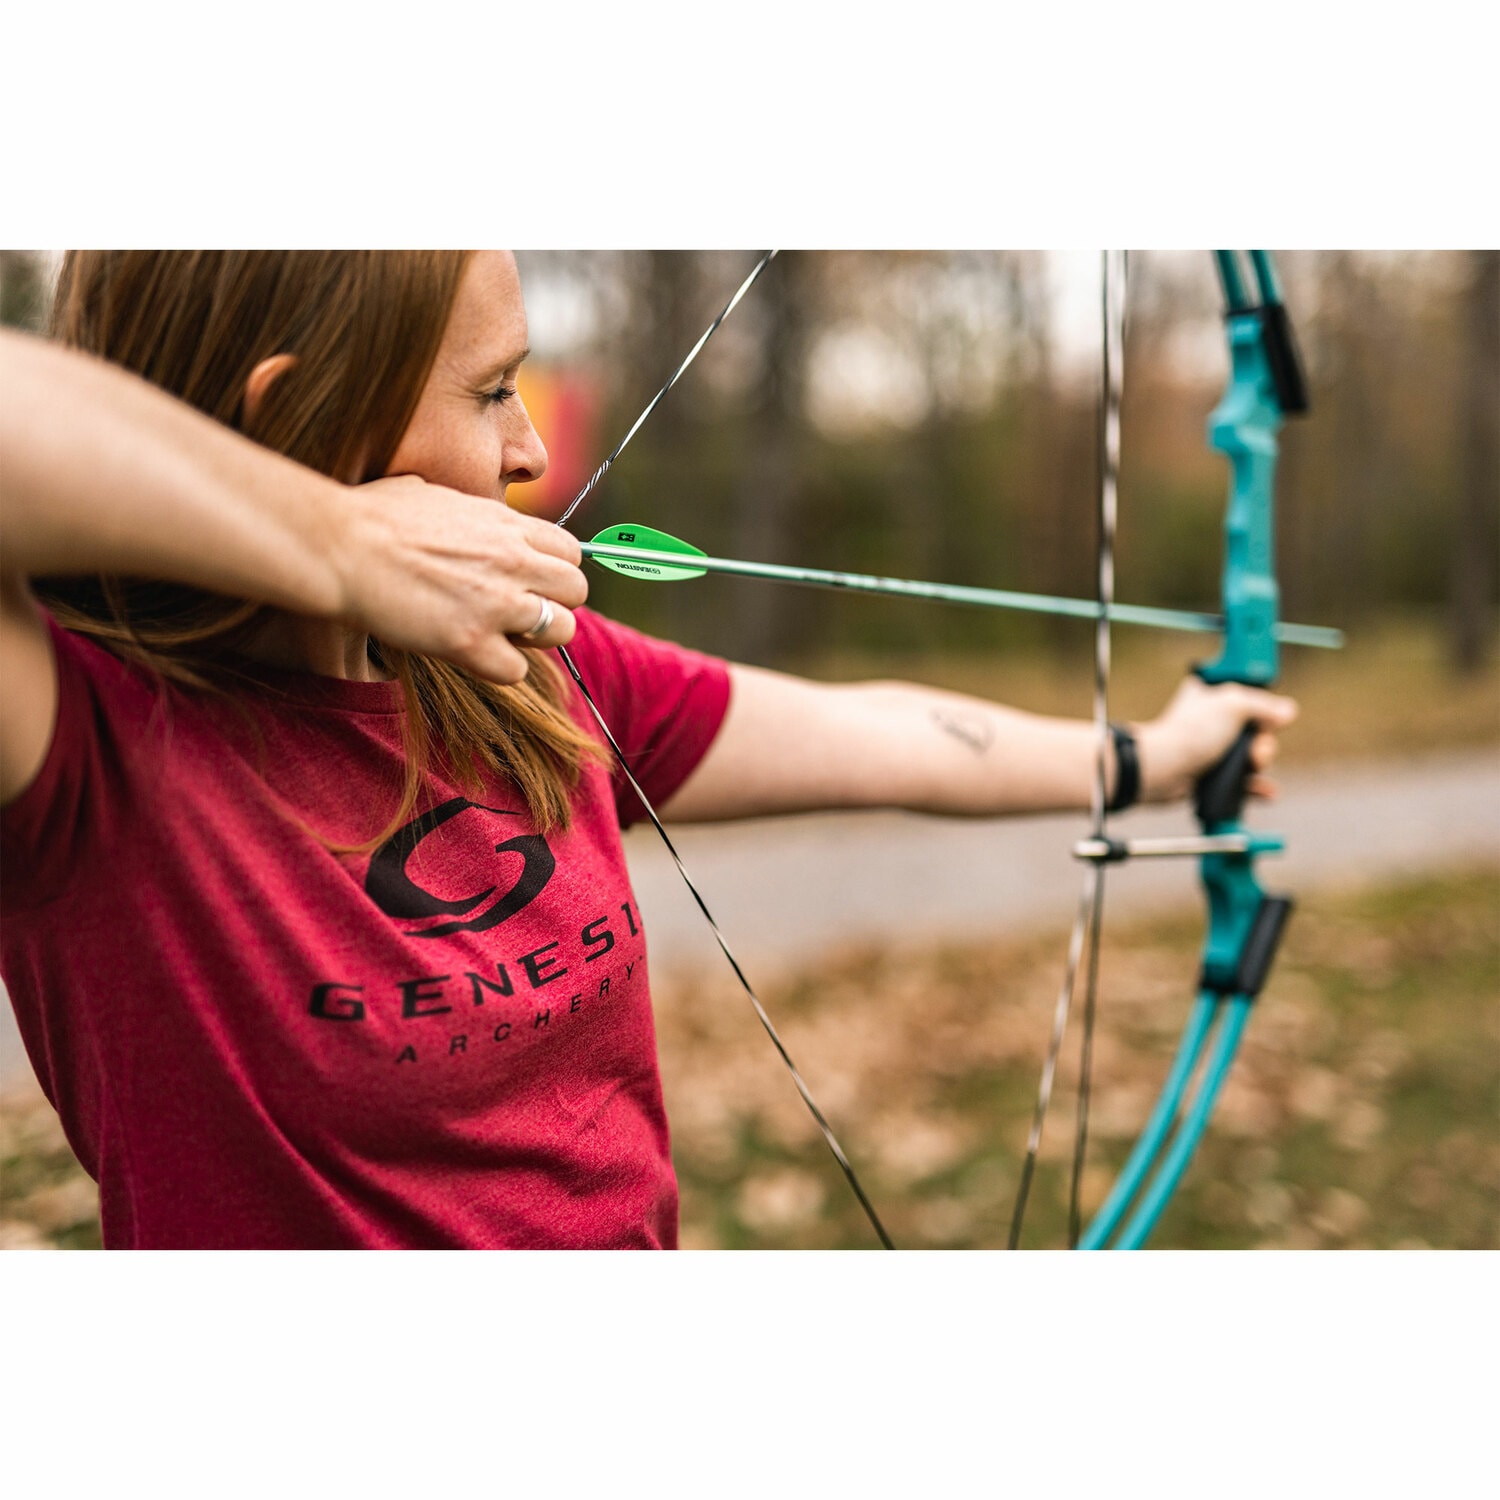 Genesis Archery Universal Fit Compound Bow for Archery Target Practice -  Adjustable Draw Length & Weight - Versatile Design for All Ages & Abilities